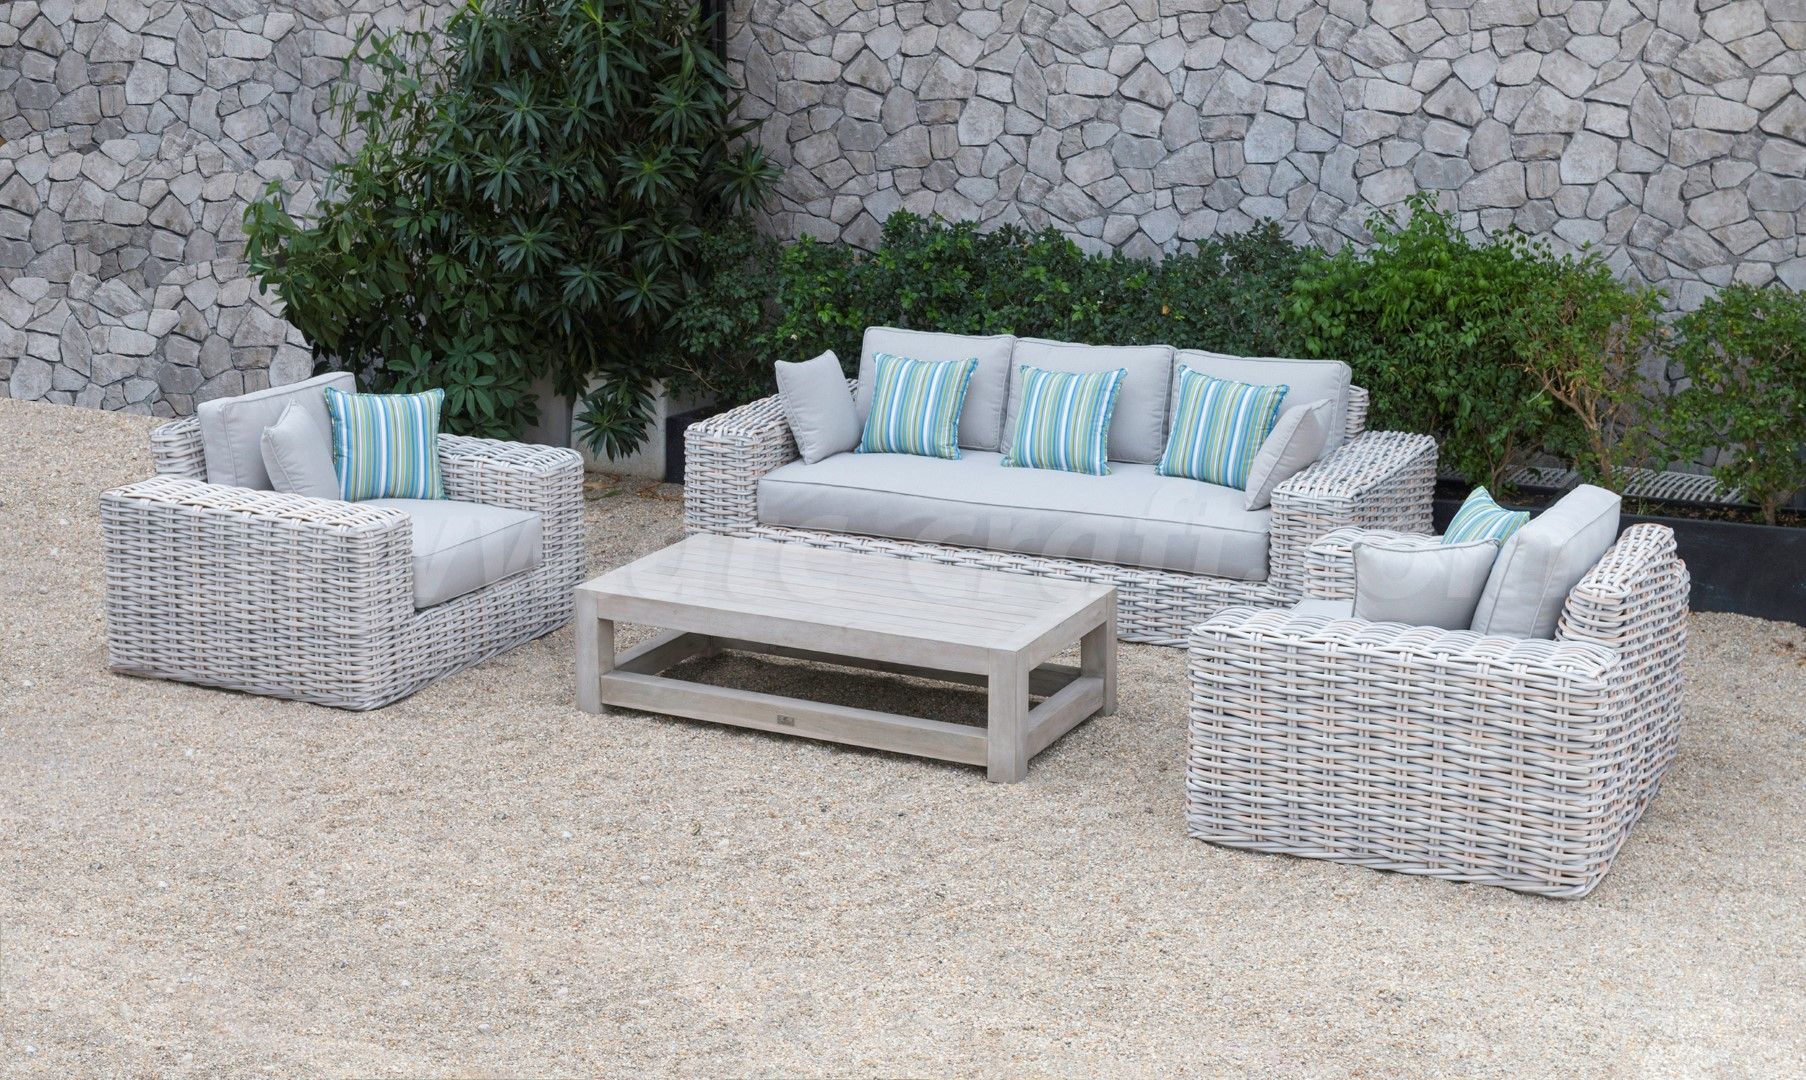 Unique Resin Wicker Sofa Set Rasf 178 – Atc Furniture – Rattan Wicker Intended For Outdoor Wicker Sectional Sofa Sets (View 9 of 15)